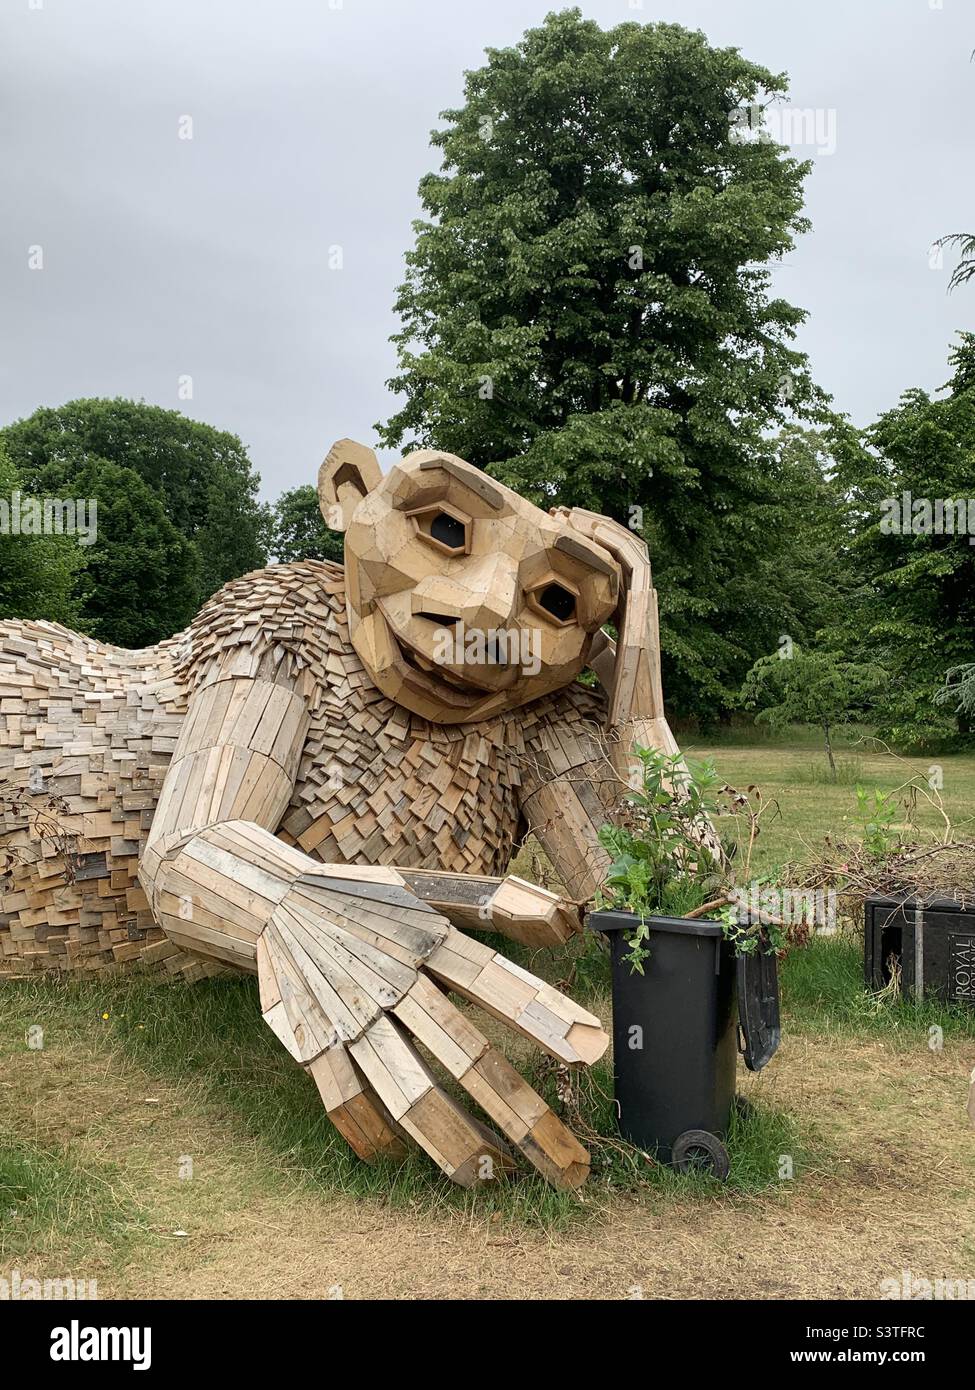 Wooden green George af Thomas Dambo Sculpture at Kew Gardens Stock Photo